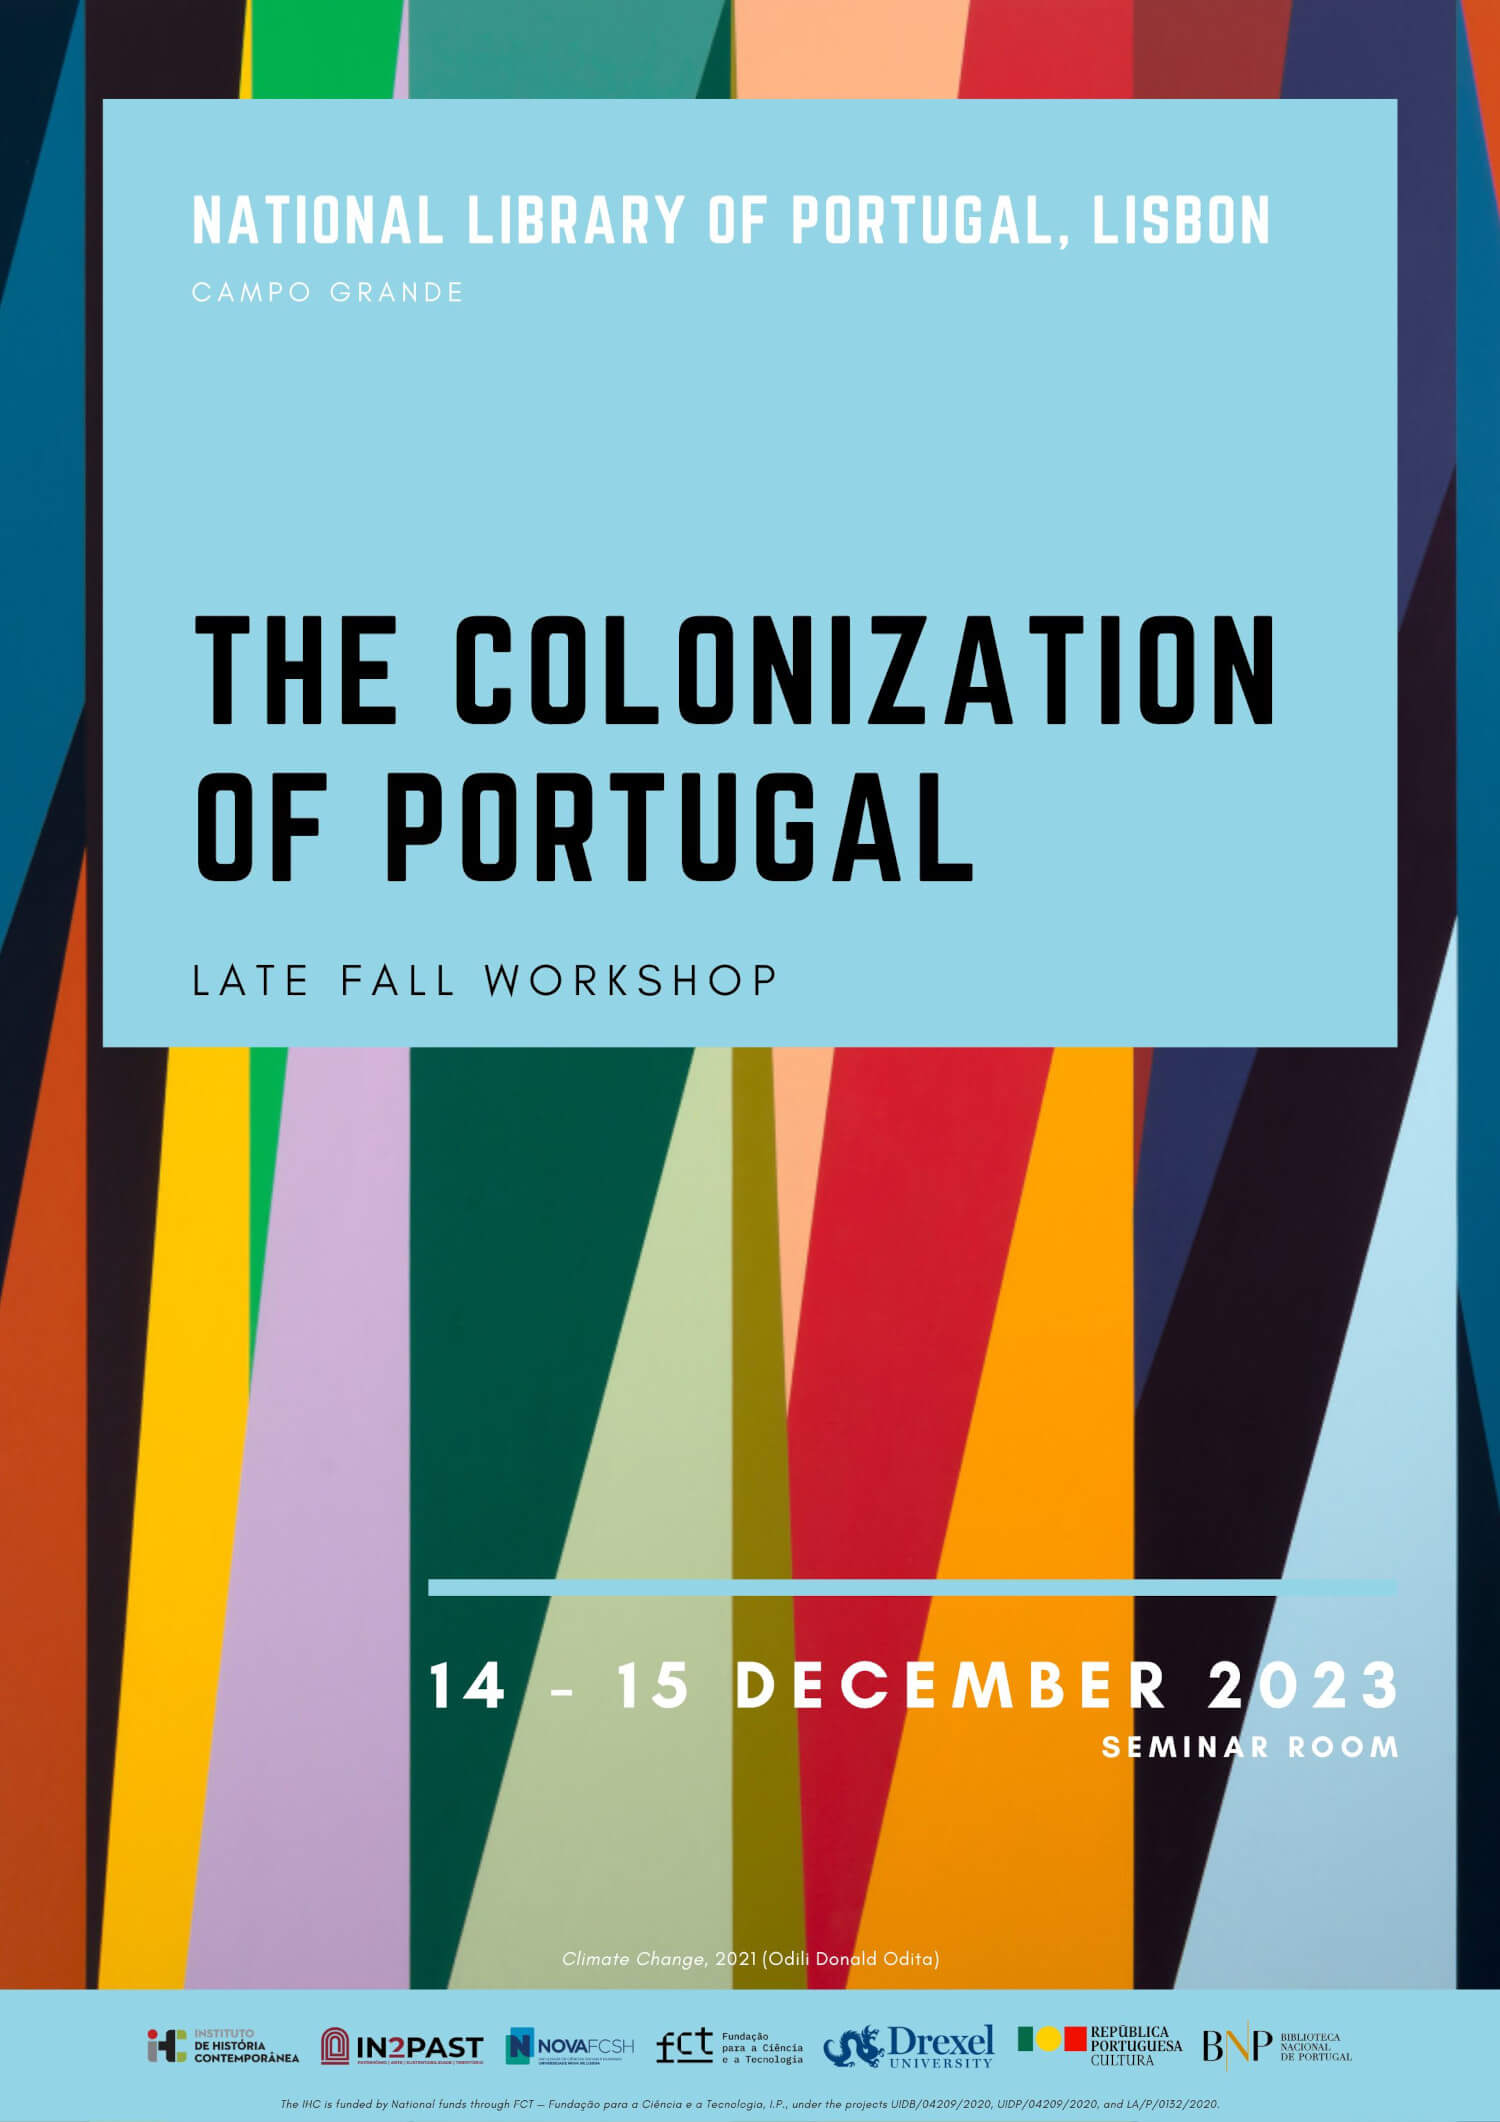 Poster for the Late Fall Workshop “The Colonization of Portugal”. 14 and 15 December 2023, National Library of Portugal, Seminar Room. The poster features an art work by Odili Donald Odita, named Climate Change. It is an abstract work with different size triangles of various colours.